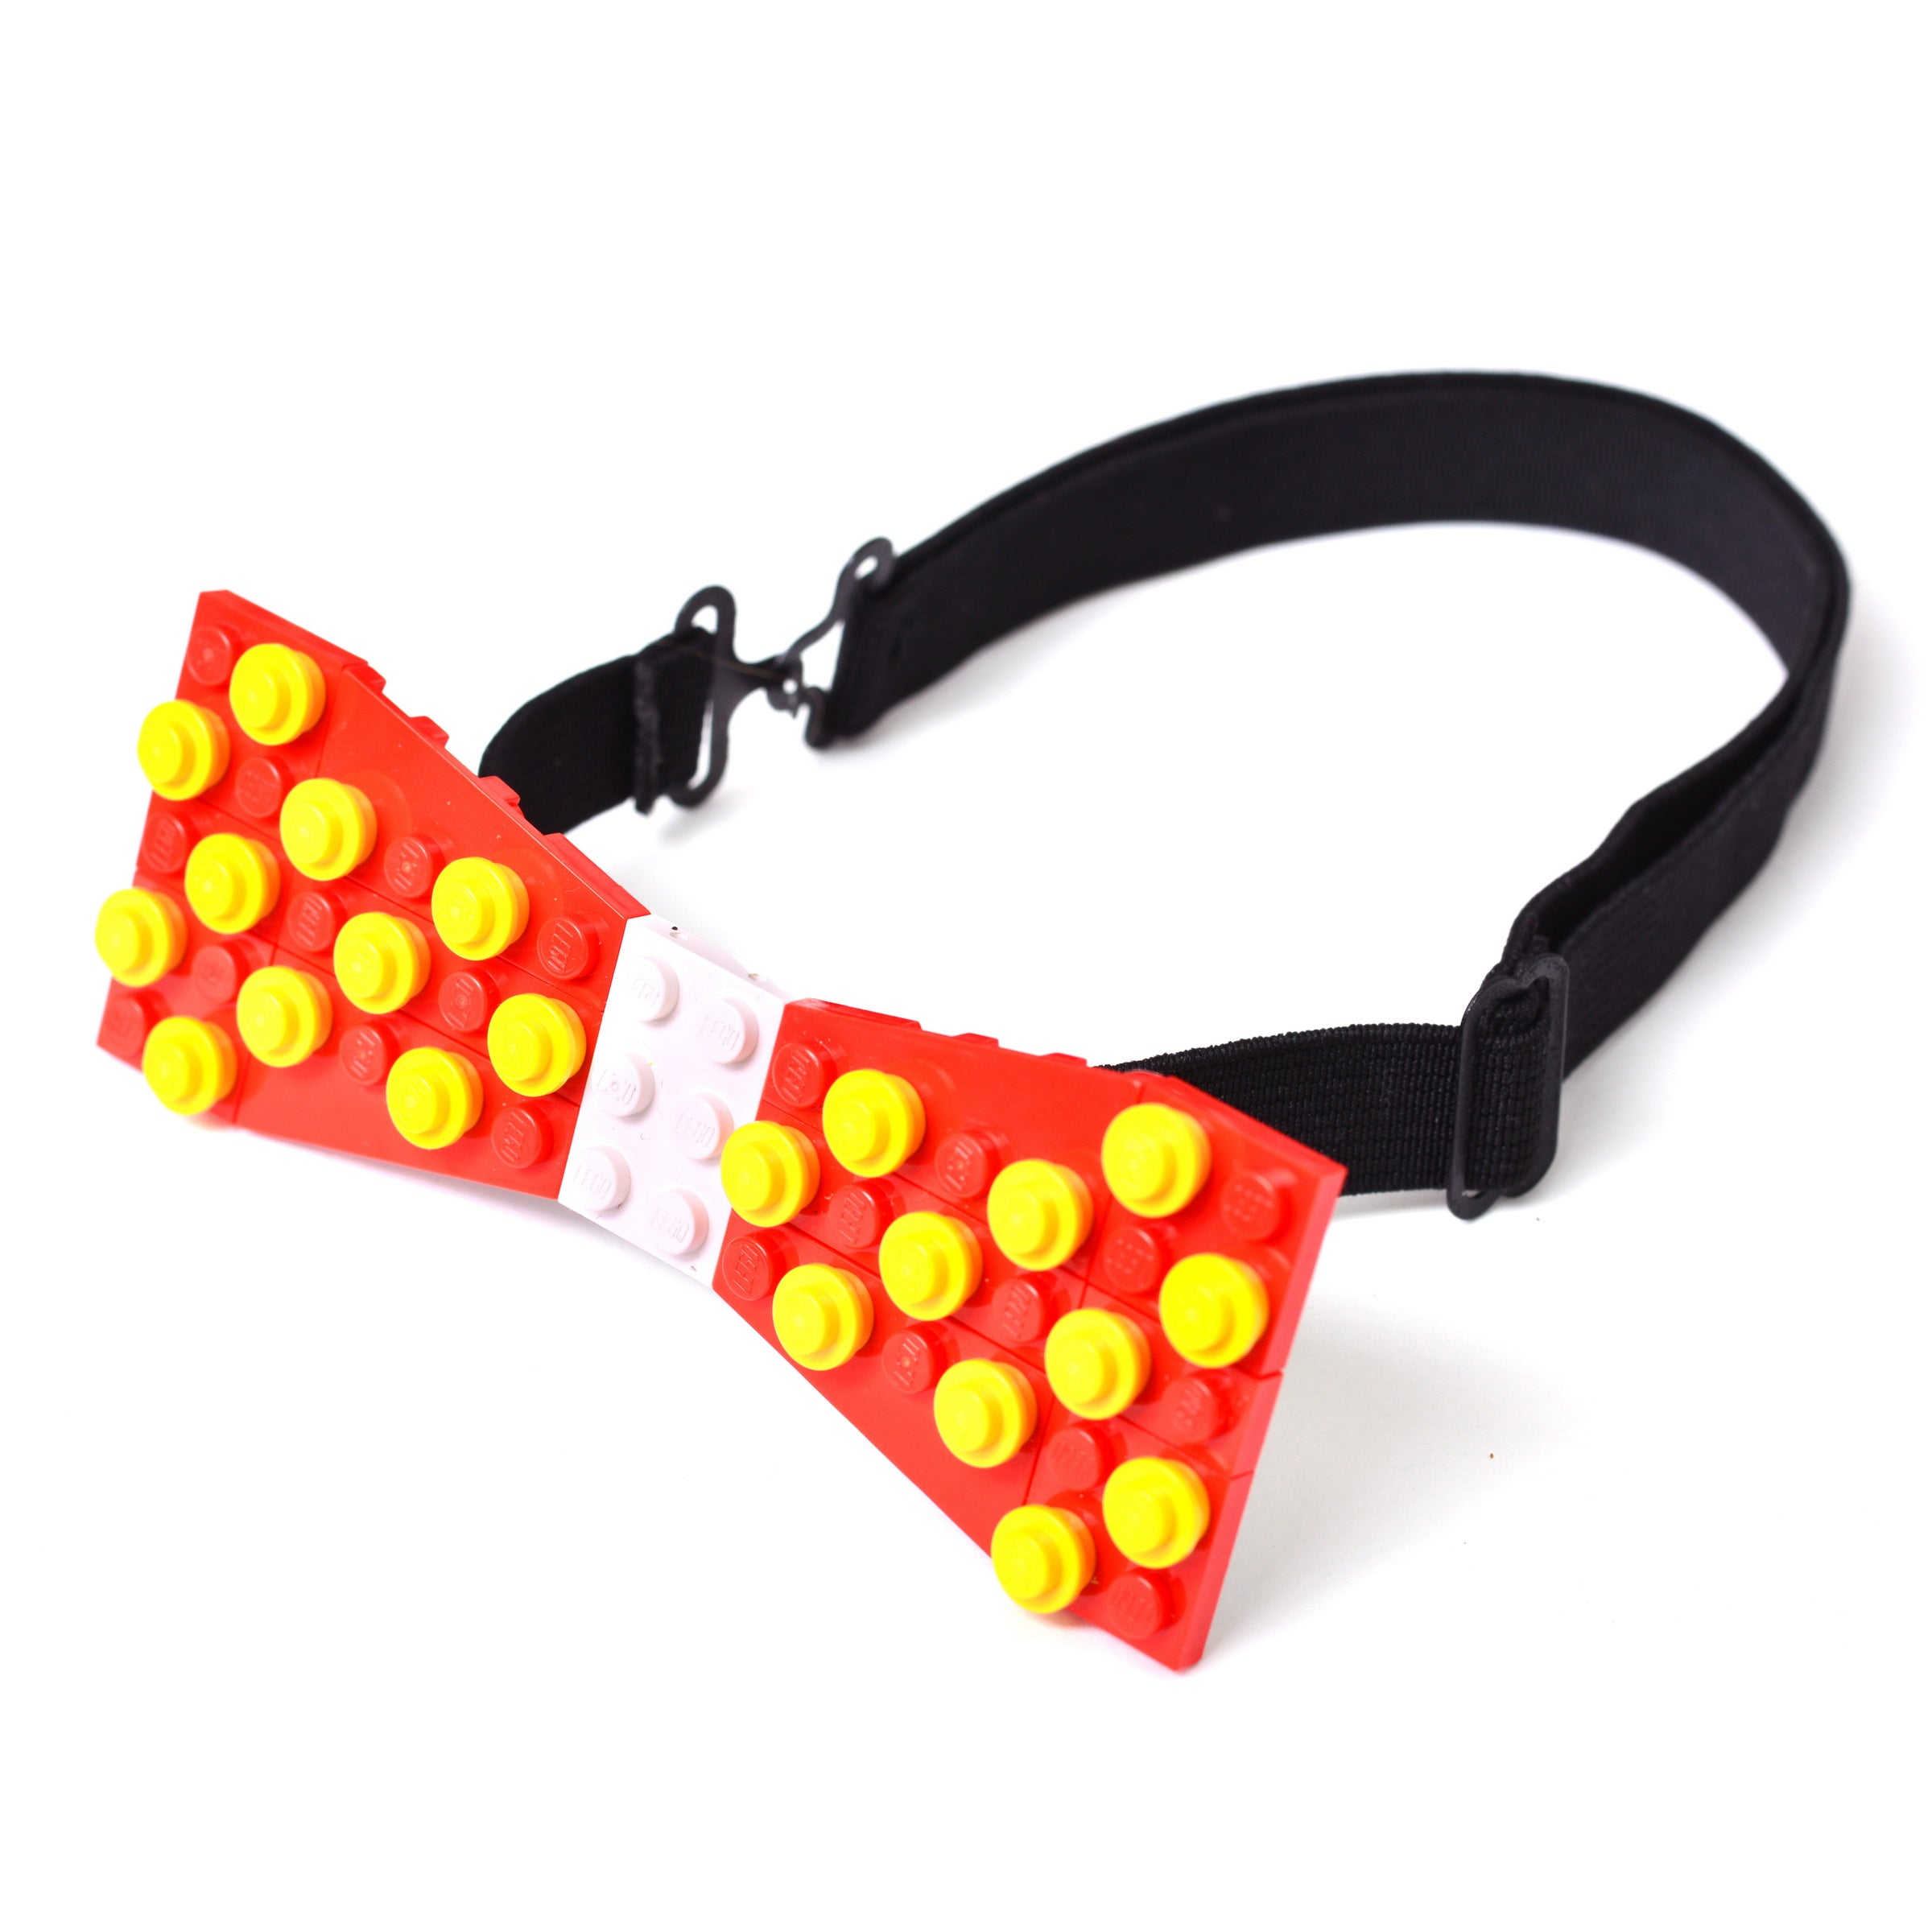 Red with white center and yellow dots